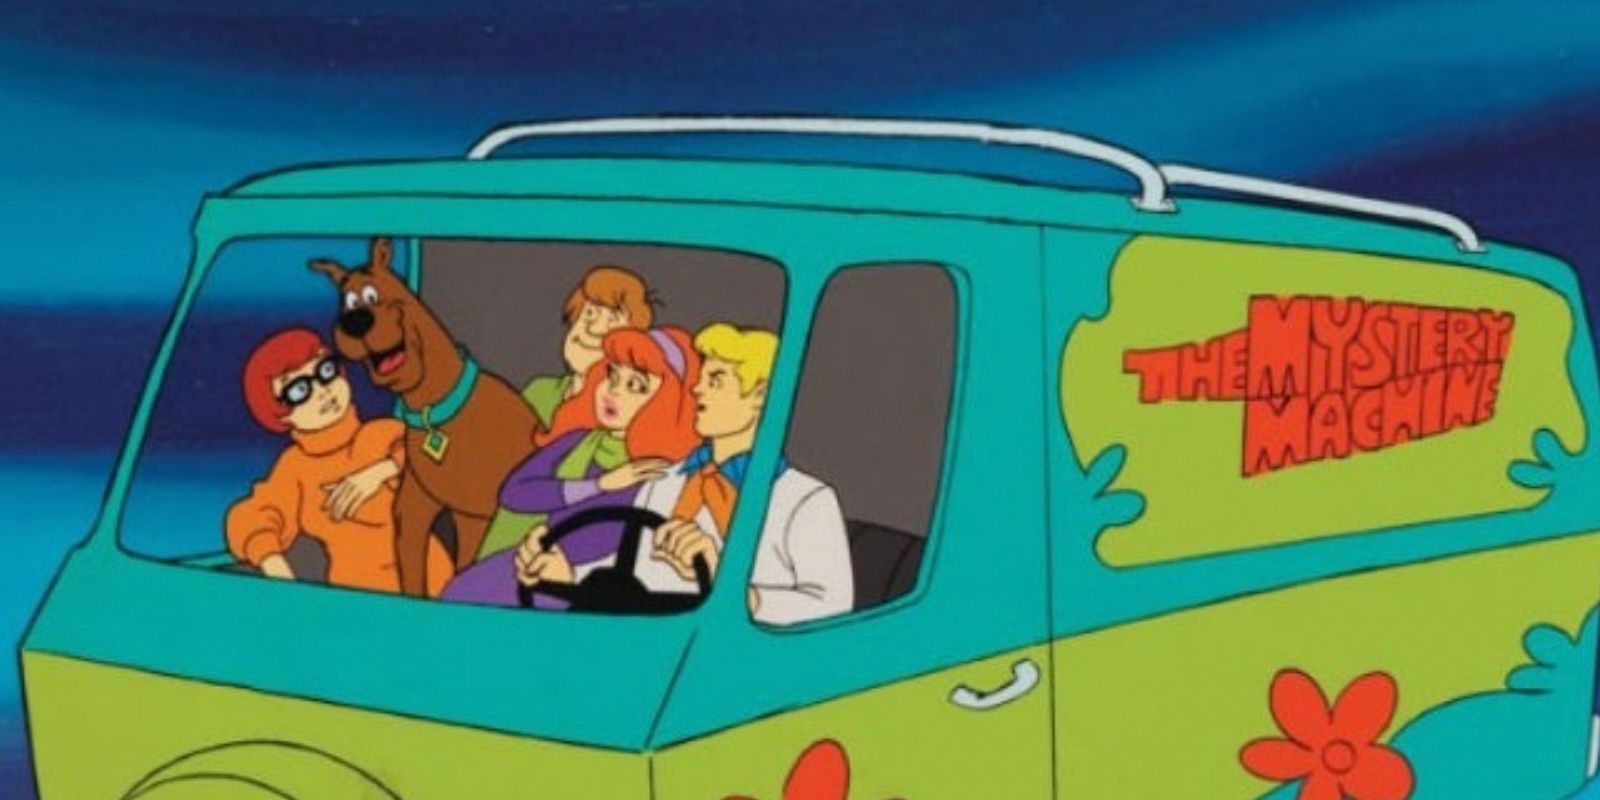 Scooby gang in the Mystery Machine in the original Scooby Doo cartoon